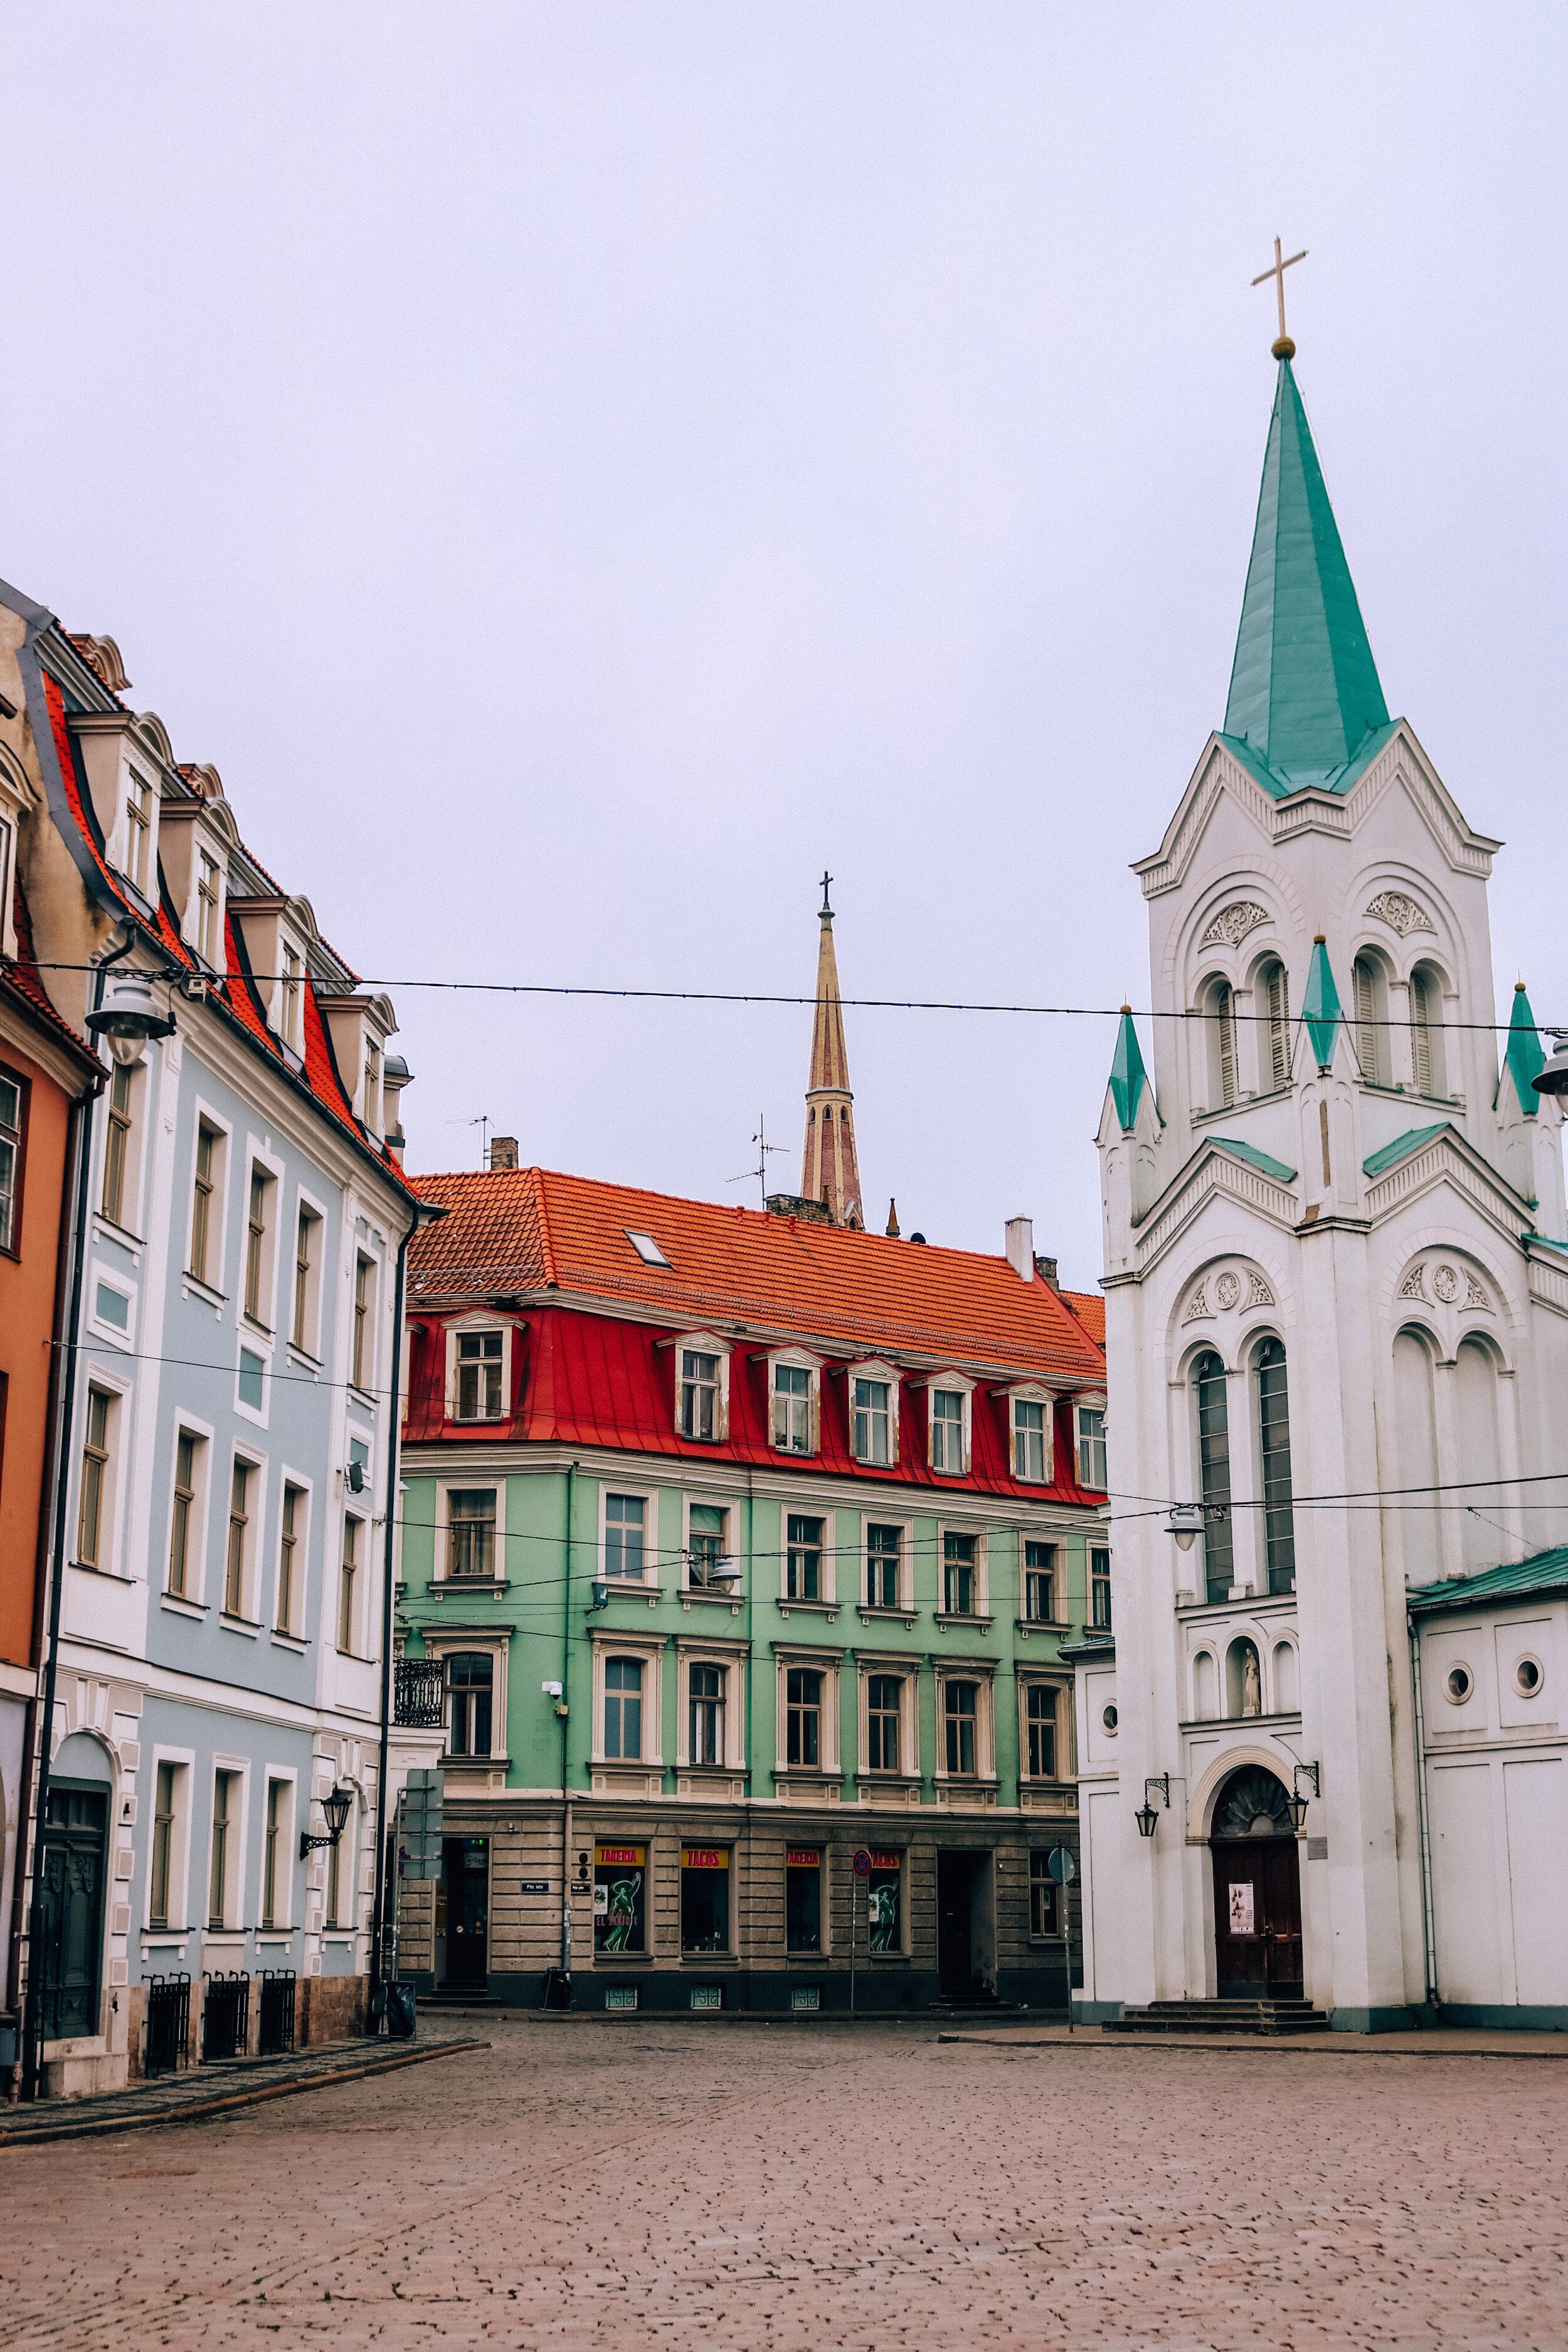 Riga Instagram Locations - the 12 most instagrammable places in Riga, Latvia